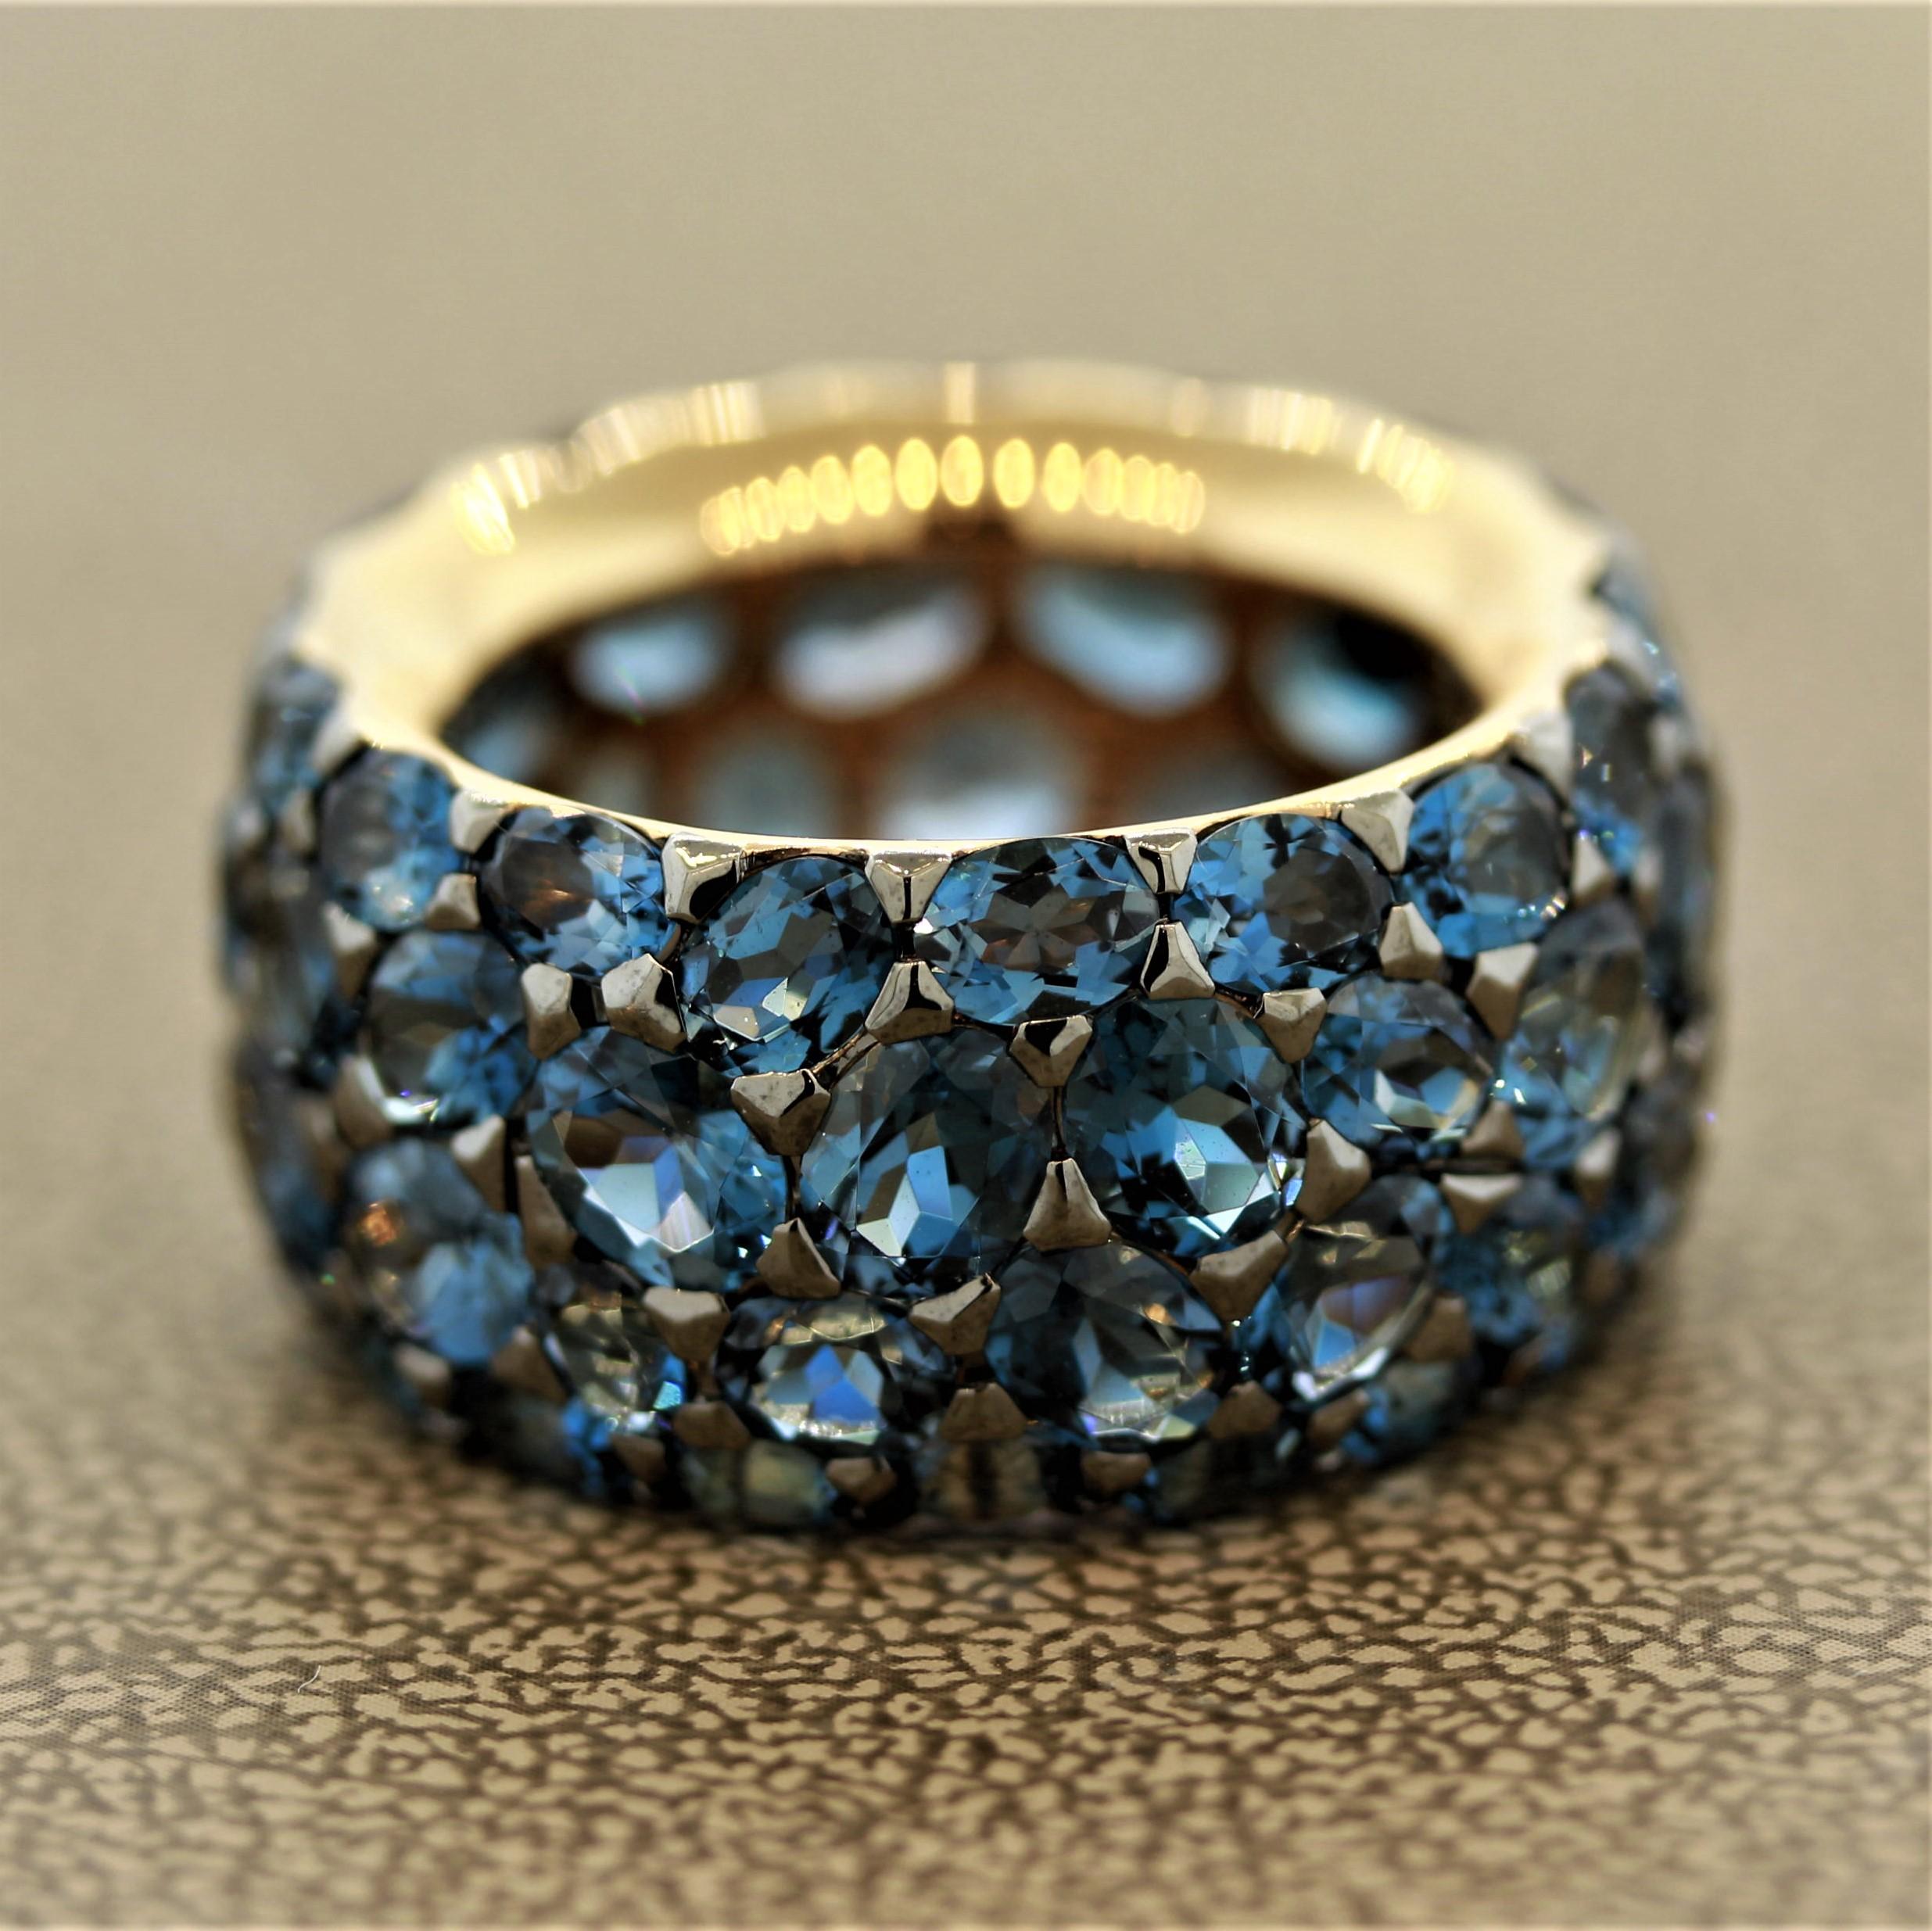 A “comfort fit” eternity band that fits smoothly and feels great being worn. It features 16.38 carats of London blue topaz with its famous deep blue color in oval shapes of different sizes. Made in 18k rose gold.

Ring Size 6.5